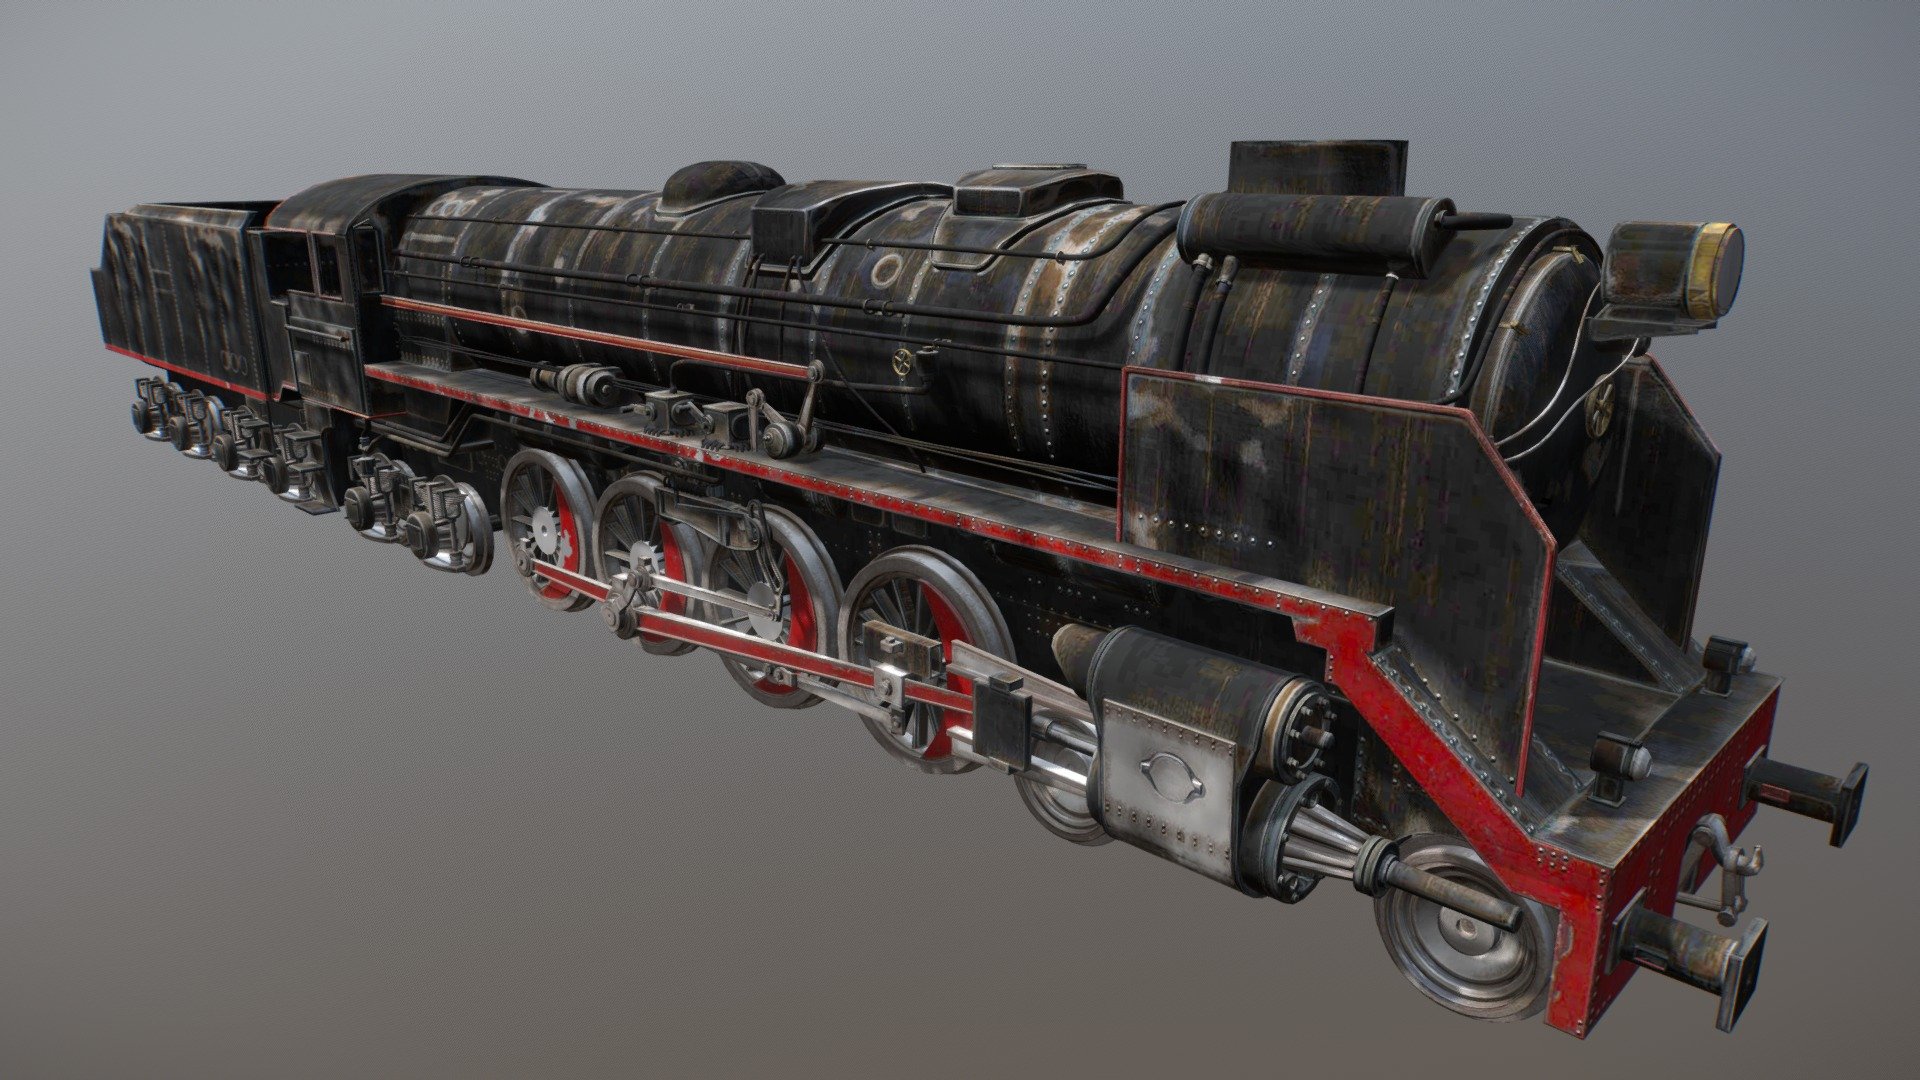 Steam Train: Mikado

Unwrapped UV’s: Overlapping

Textures include normal, diffuse, specular and glossy map in 4096x2048k - Steam Train Mikado - 3D model by Bonhart 3d model